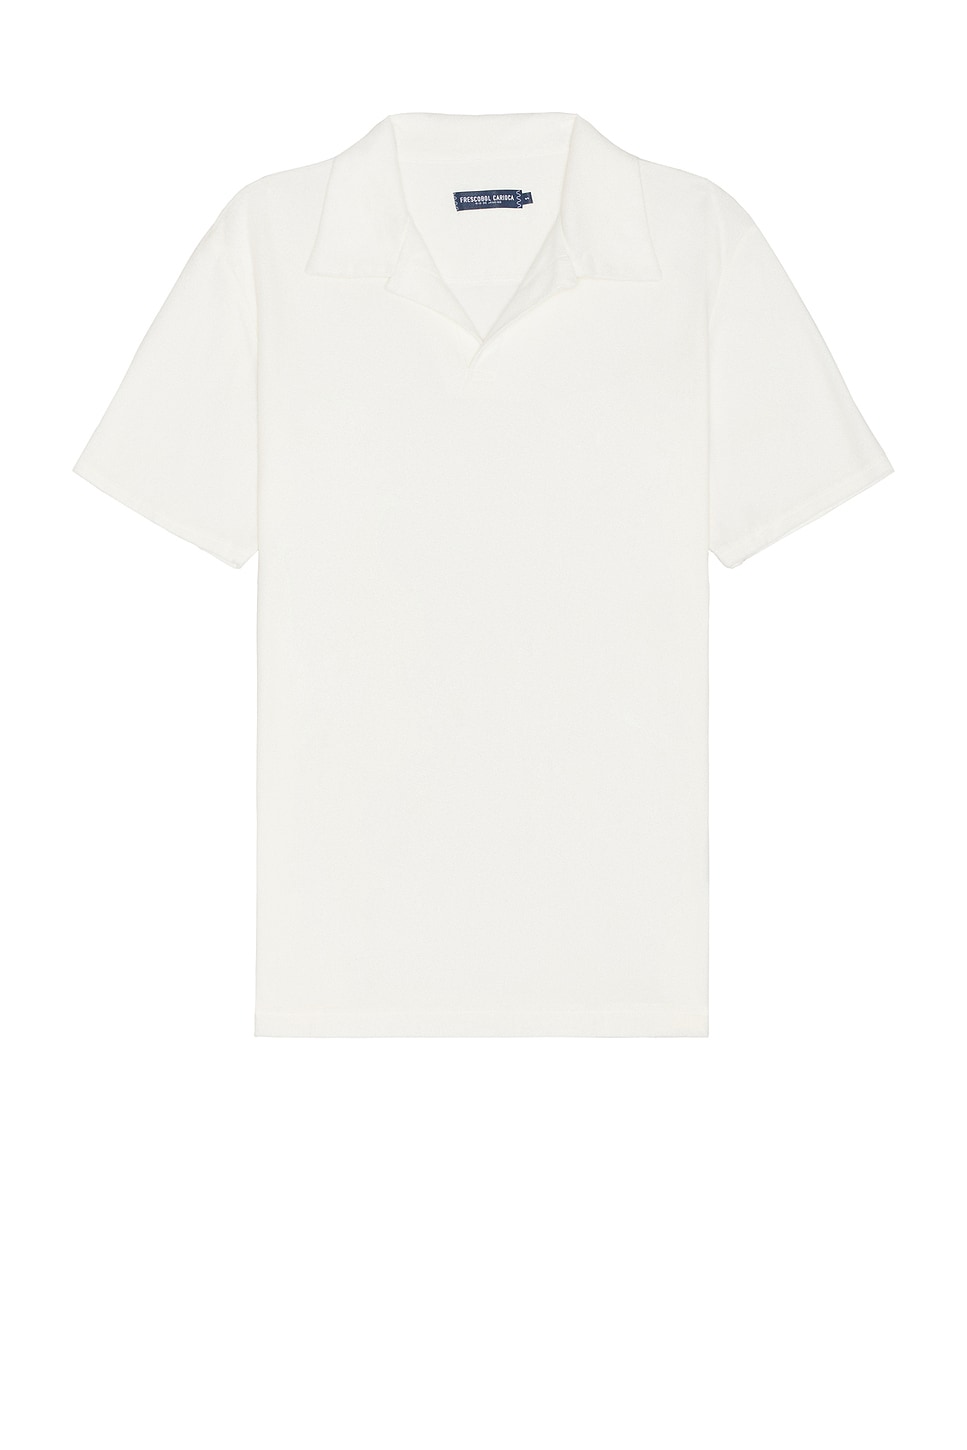 Faustino Terry Cotton Blend Short Sleeve Polo in Ivory